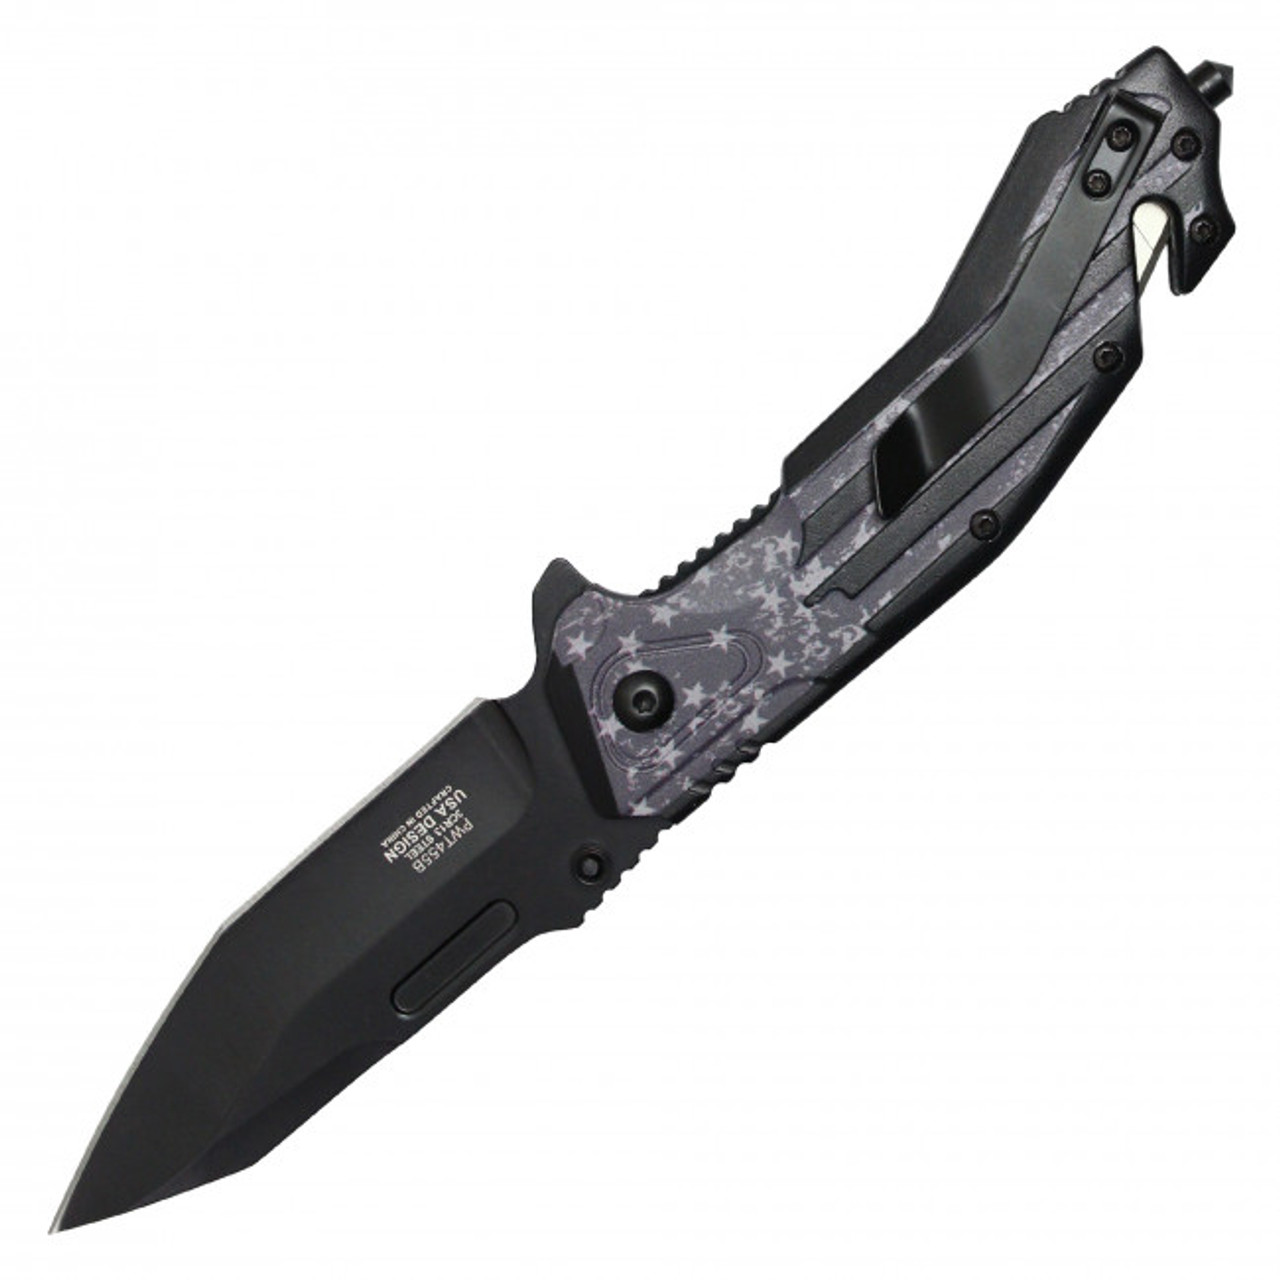 8.5" Assisted Opening Pocket Knife WarTech - PWT455B